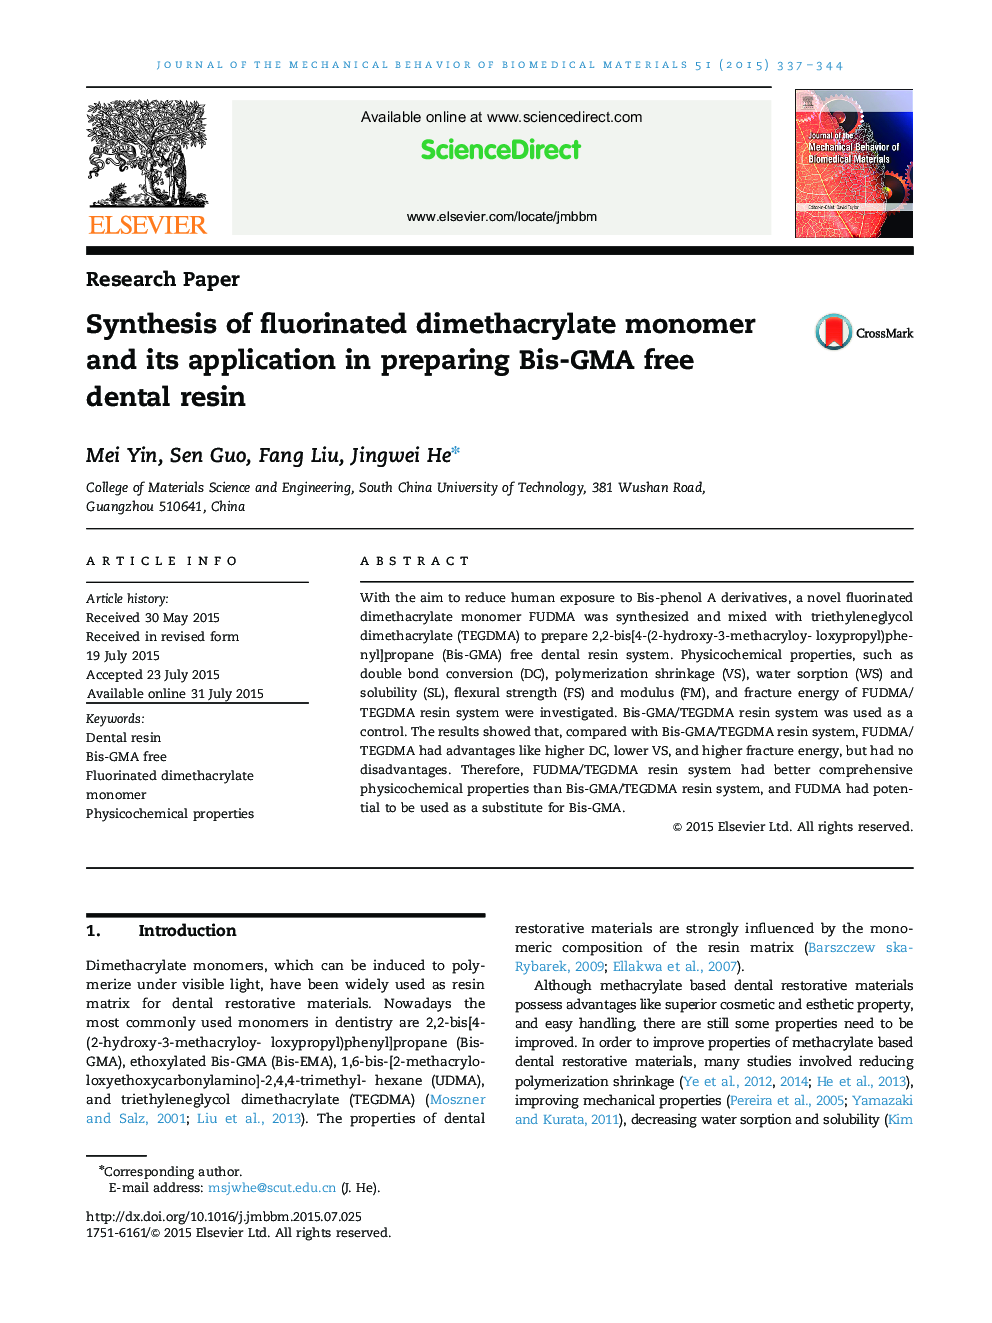 Synthesis of fluorinated dimethacrylate monomer and its application in preparing Bis-GMA free dental resin